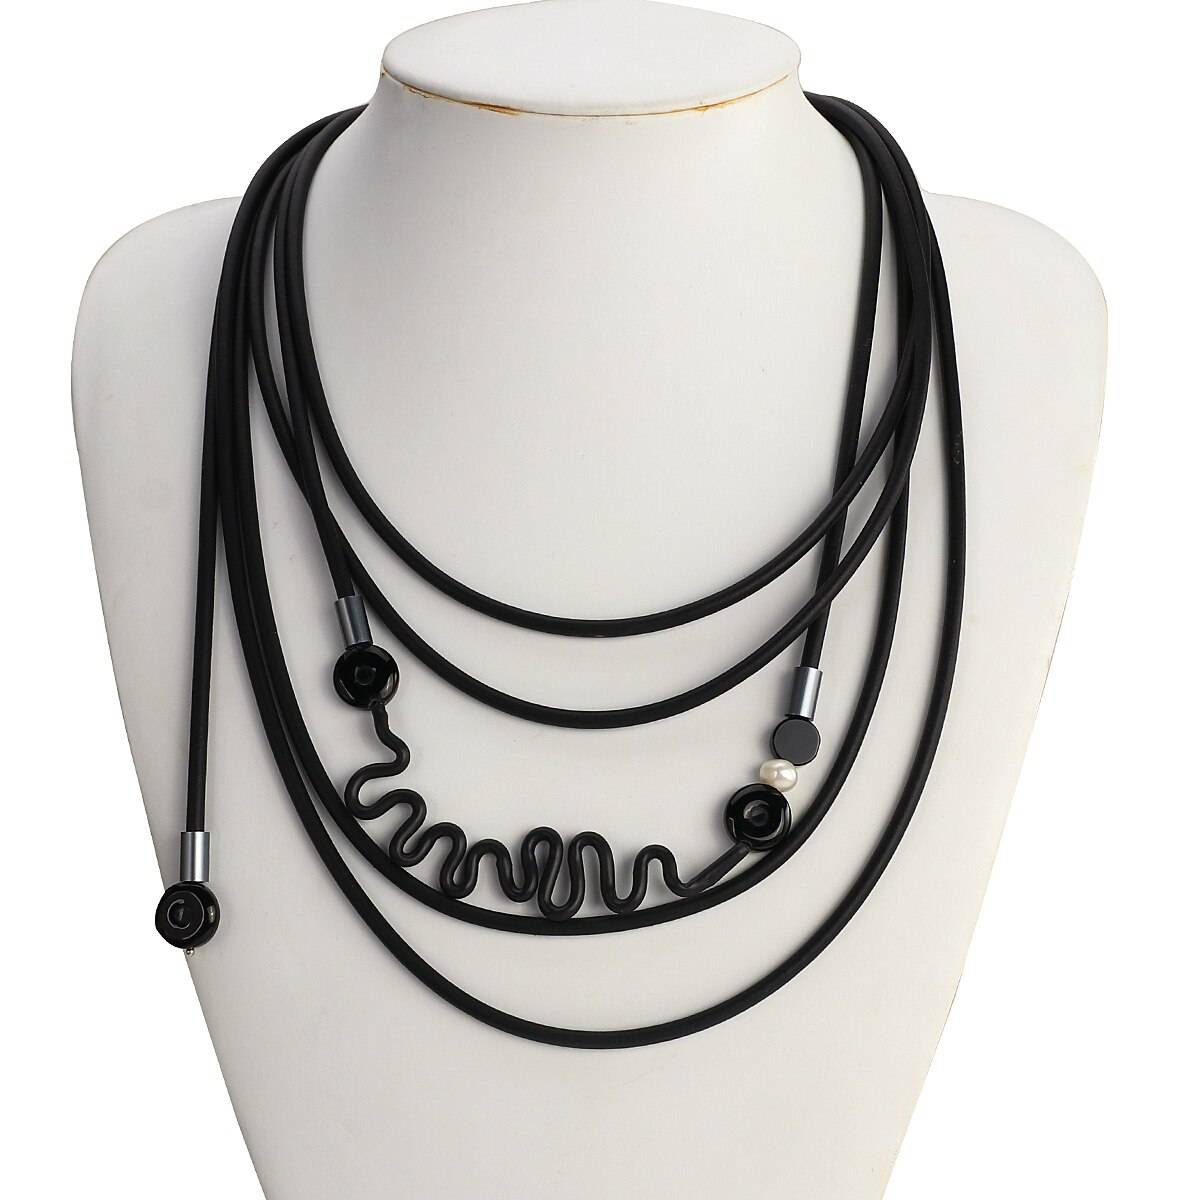 Hyperbole Silicone and Beads Layered Necklaces for Women – YANA Uncategorized Handmade Jewellery Layered Necklace Mother's Day Gifts Necklaces Statement Necklace 8d255f28538fbae46aeae7: Black